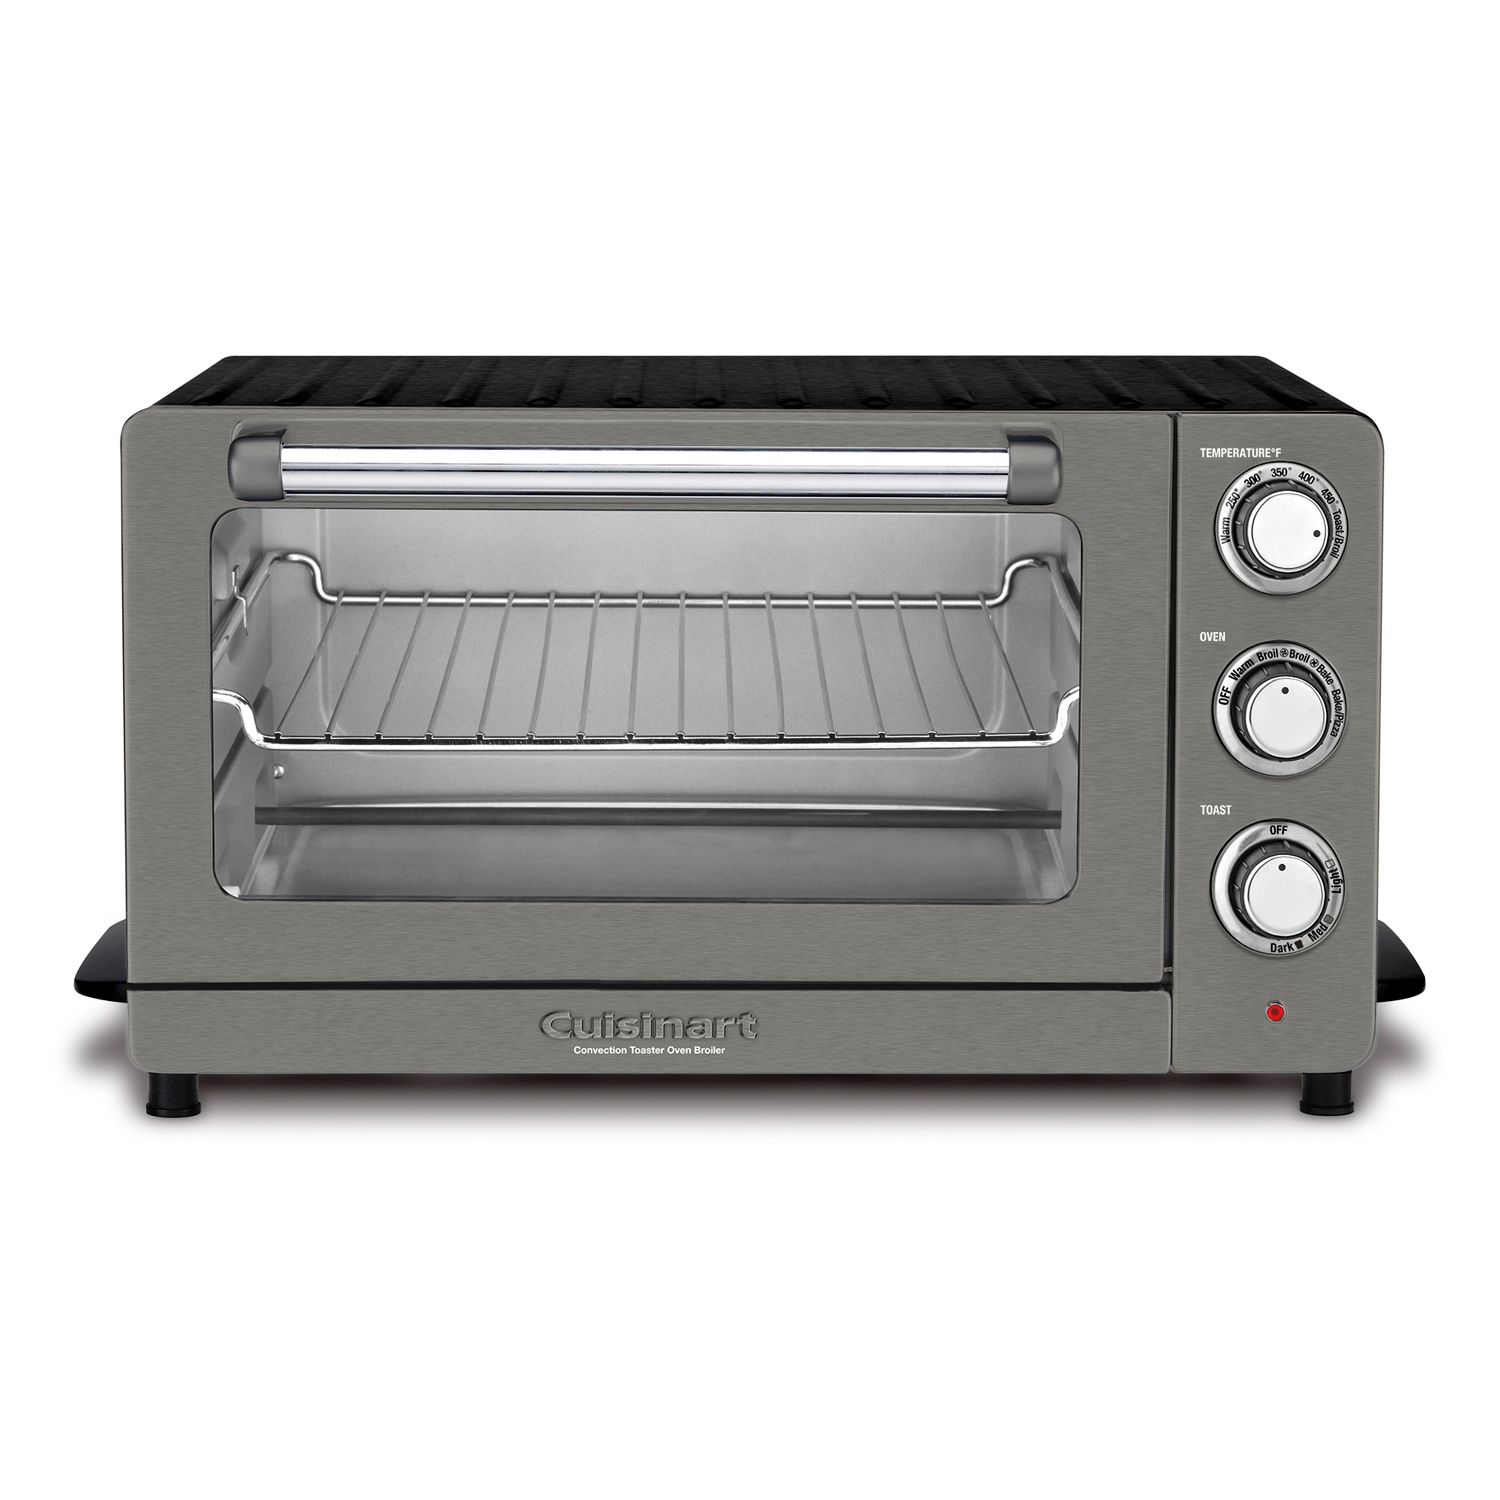  AUG Countertop Steam Oven, Convection Combi Oven ,  Multifunctional Toaster Oven, Steam, Grill, Sterilize, Bake, 50+ Precise  Temperature Control and Steam Self-Clean ,Cooking Accessories Included:  Home & Kitchen